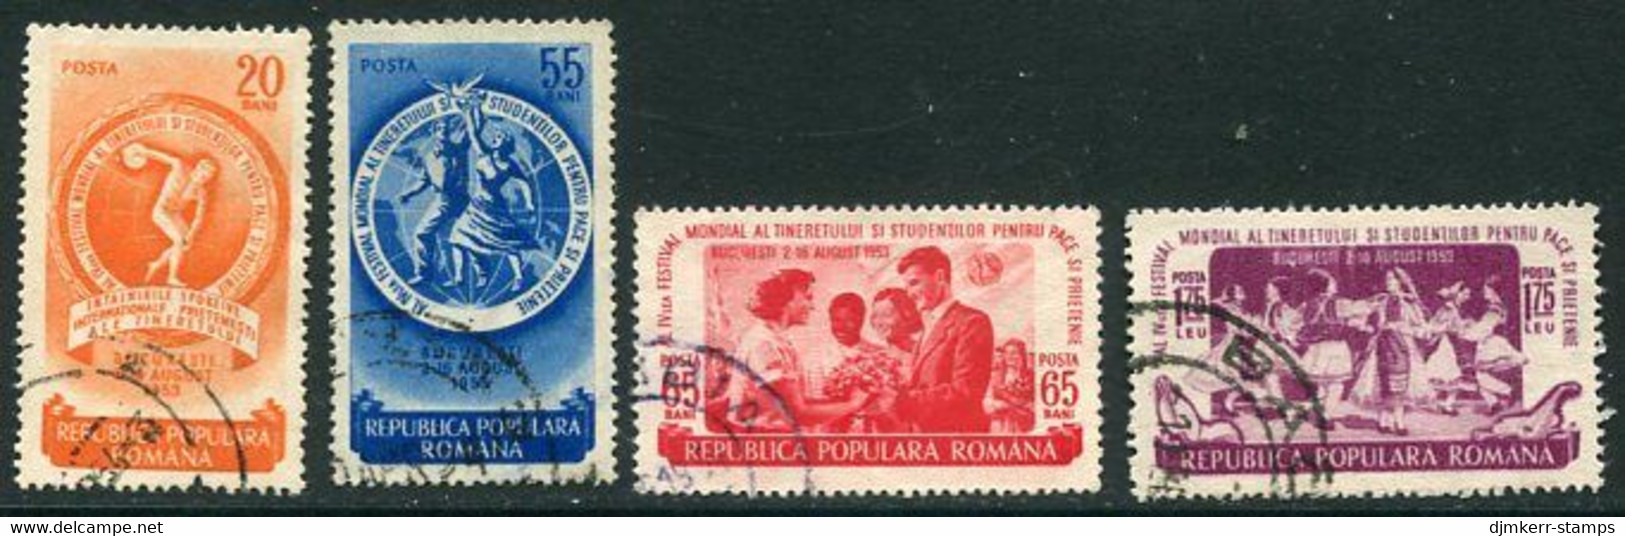 ROMANIA 1953 Youth And Student Festival  Used.  Michel 1435-38 - Oblitérés